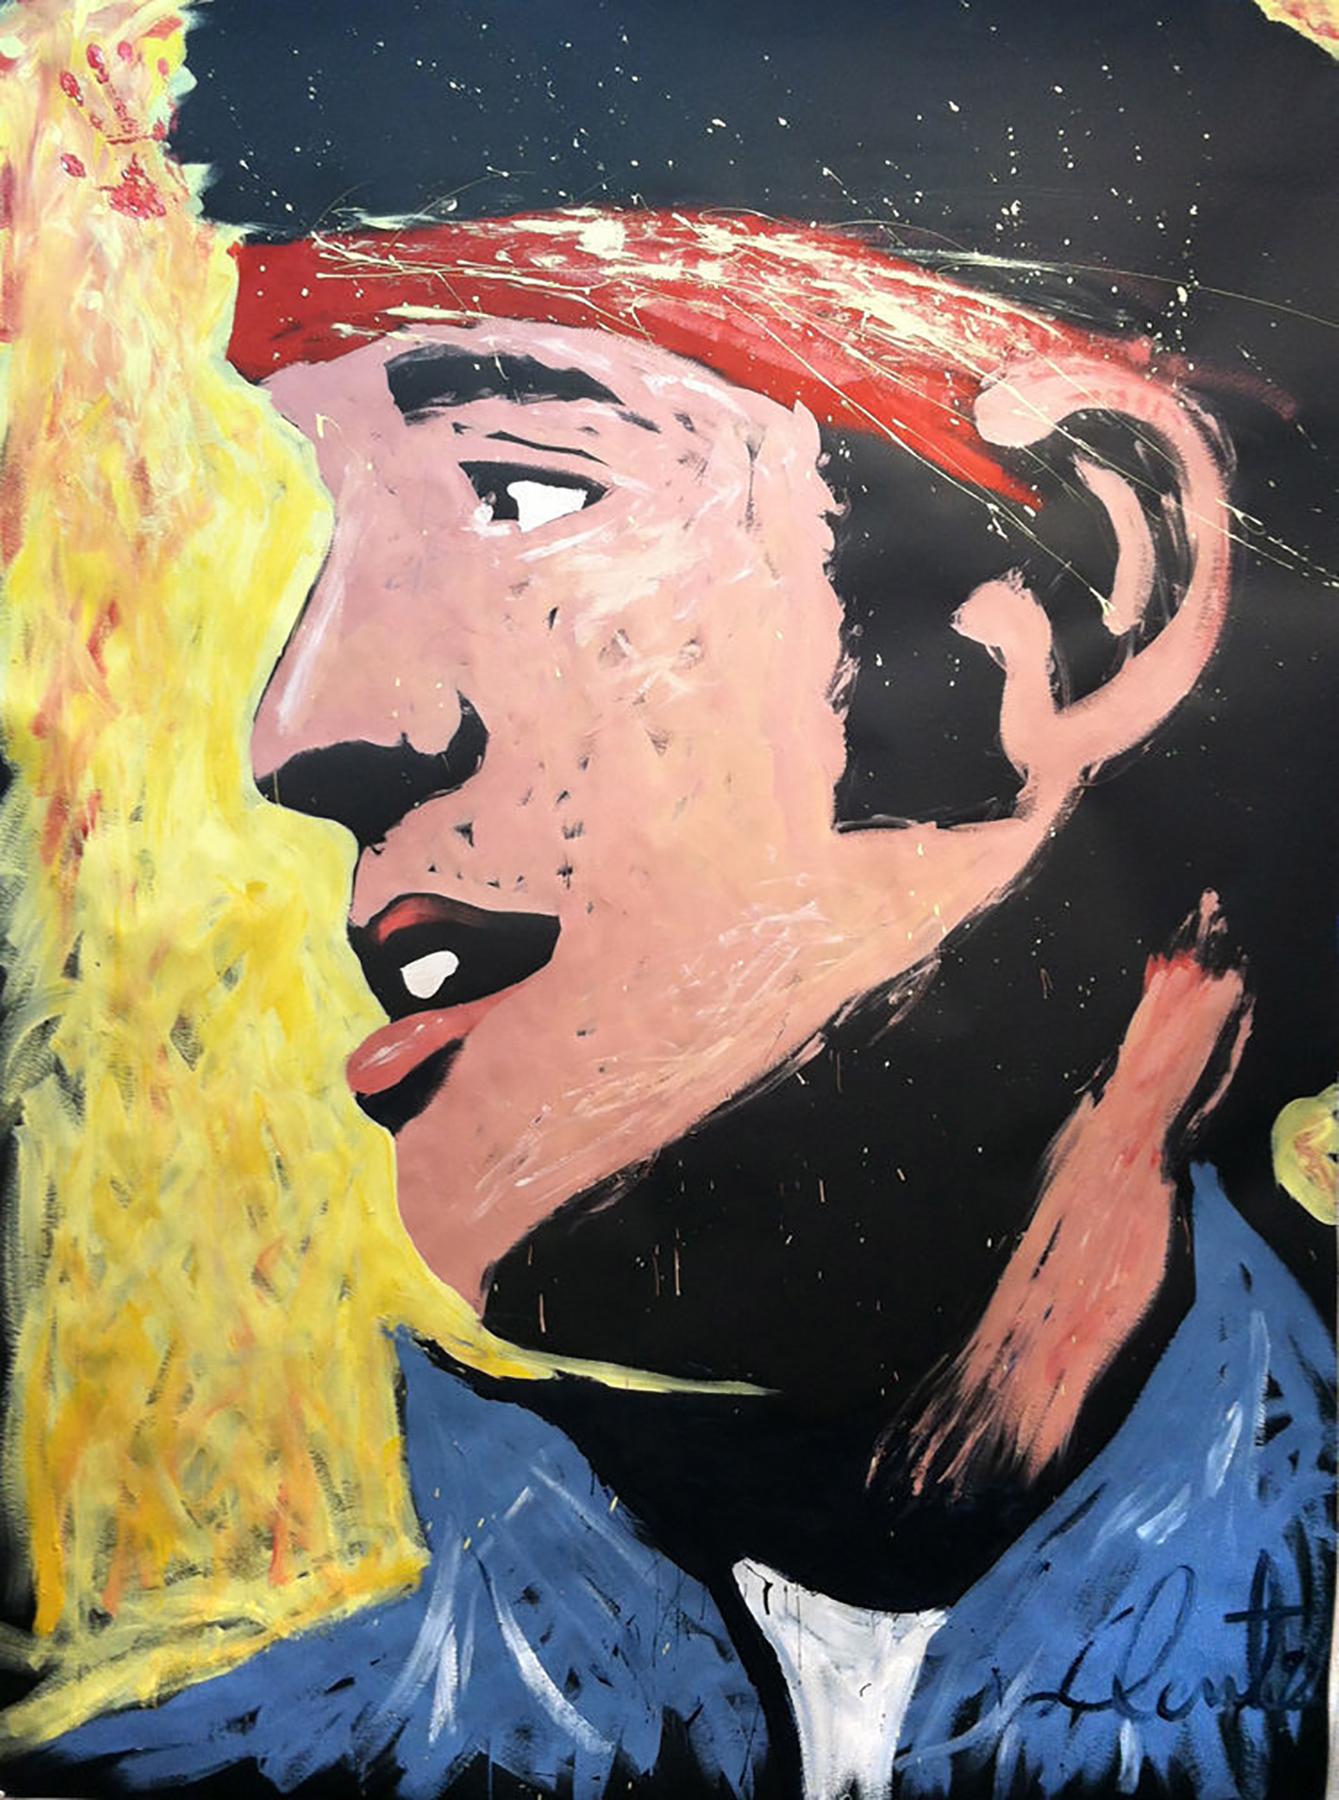 Artist: Denny Dent 
Medium: Original Oil Painting 
Title: Bruce Sprinsteen Size 53" x 72" 

The piece is spectacular in person.  
This is the best Bruce Springsteen Denny Dent we have ever come across.  Pictures do not do the piece justice.   The